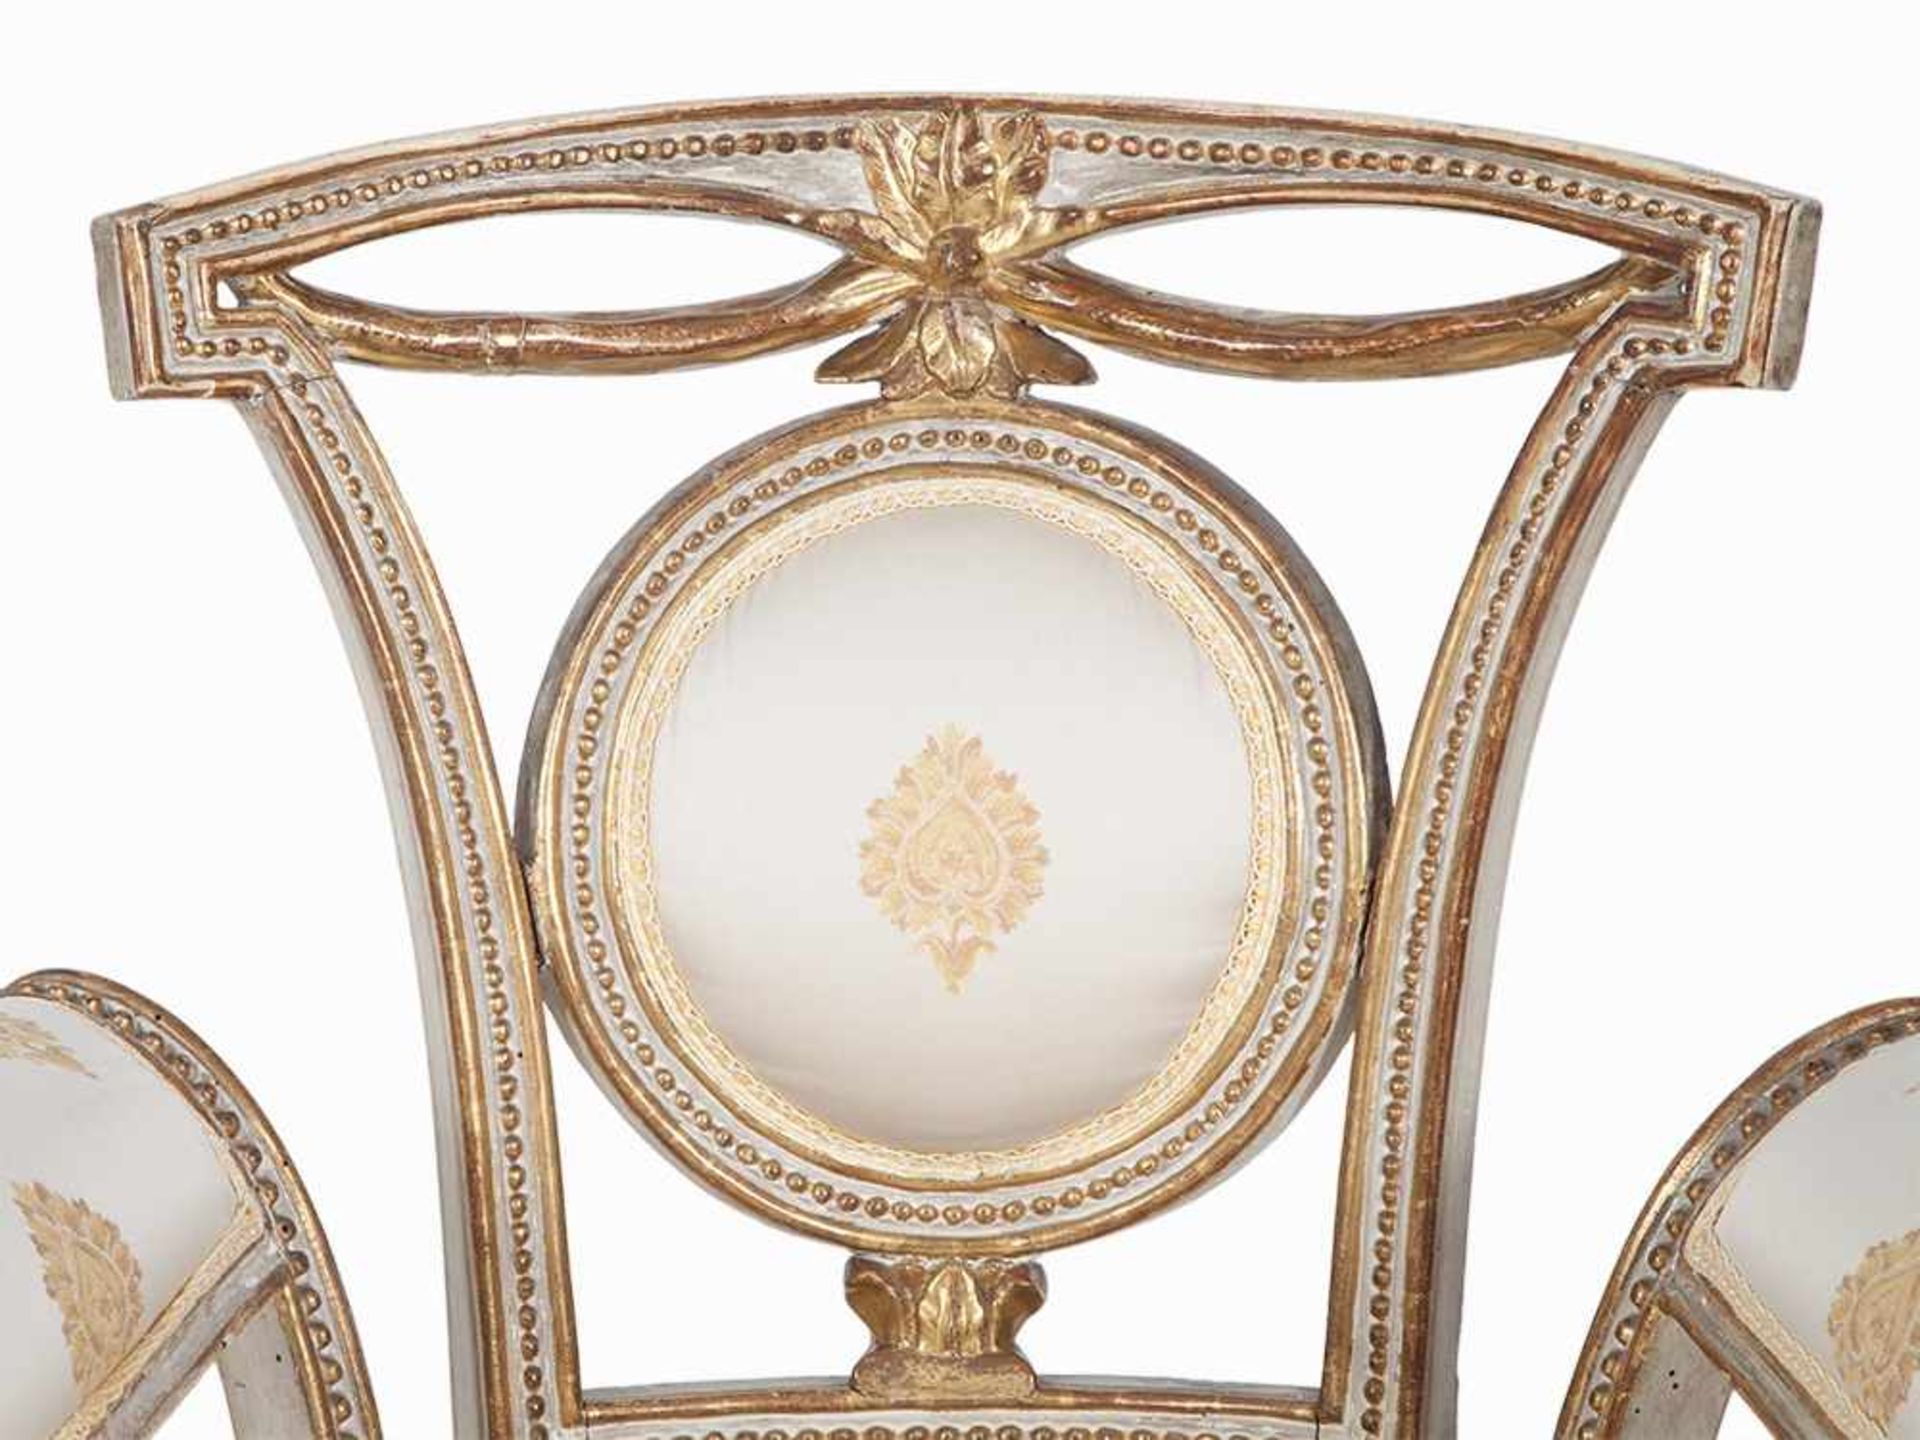 Pair of Armchairs, Lucca, around 1790 Solid wood, carved, white painted and partial gold-plated, - Image 4 of 10